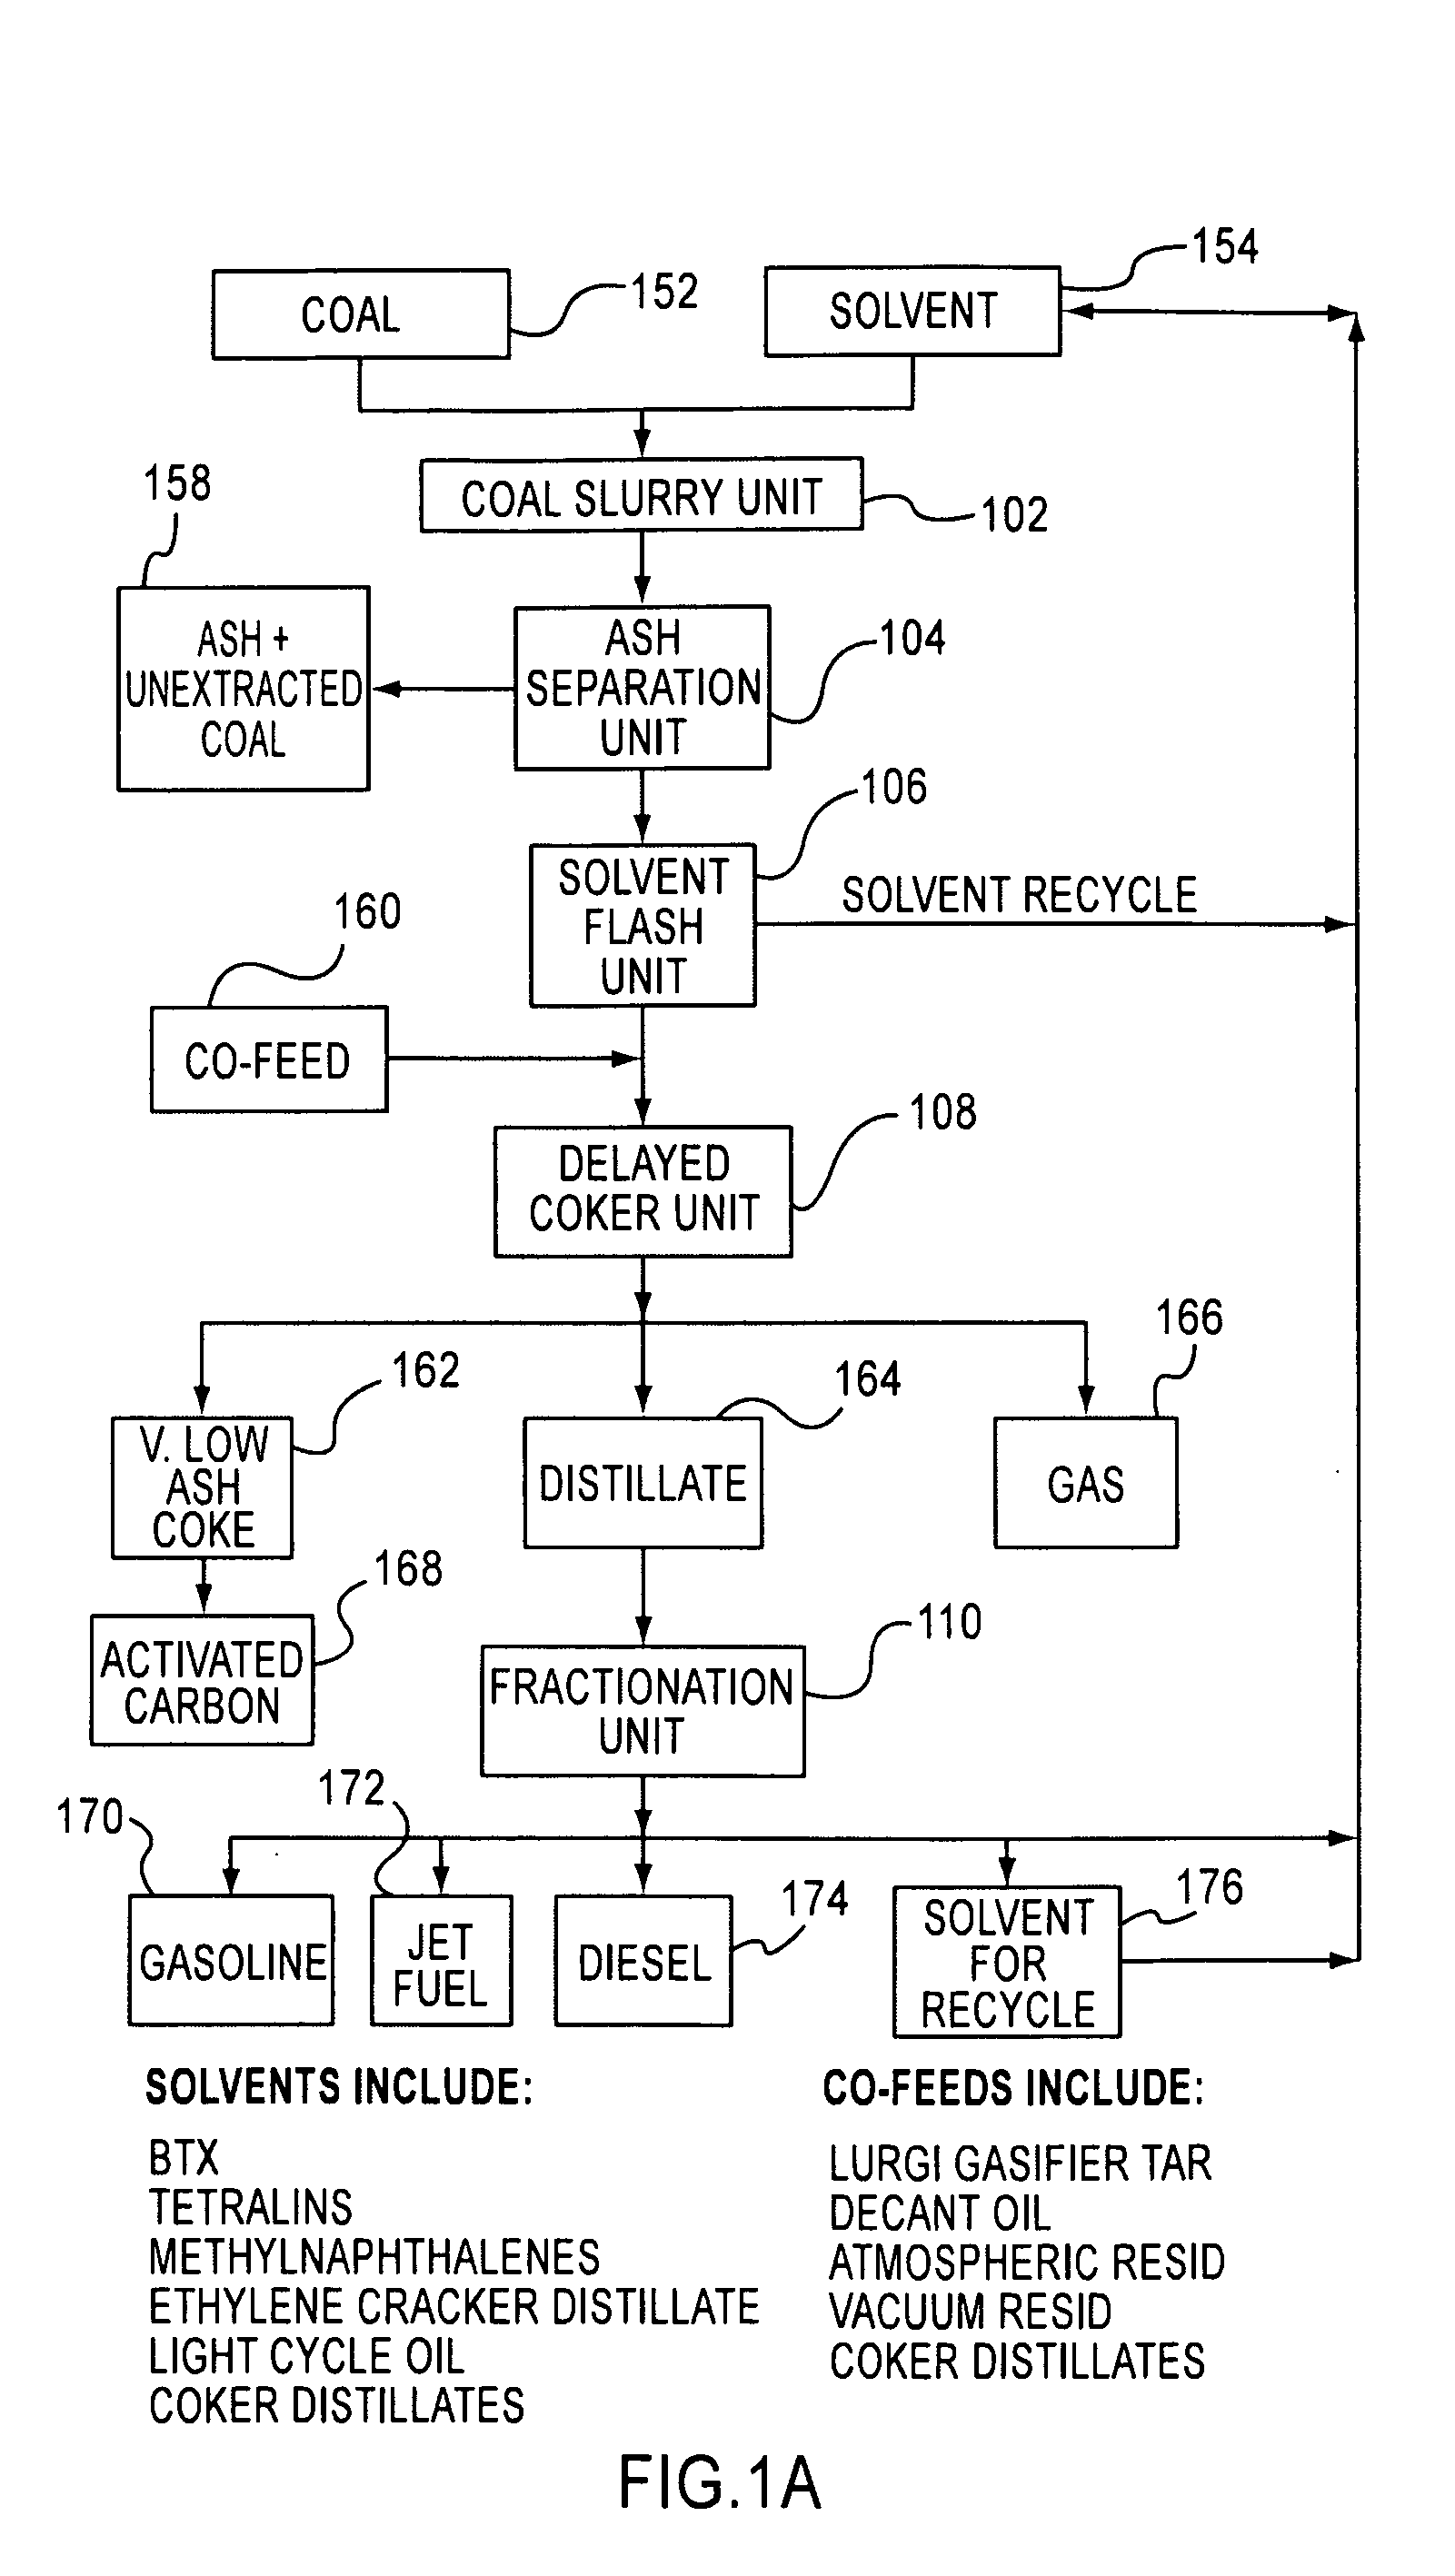 Apparatus and processes for production of coke and activated carbon from coal products